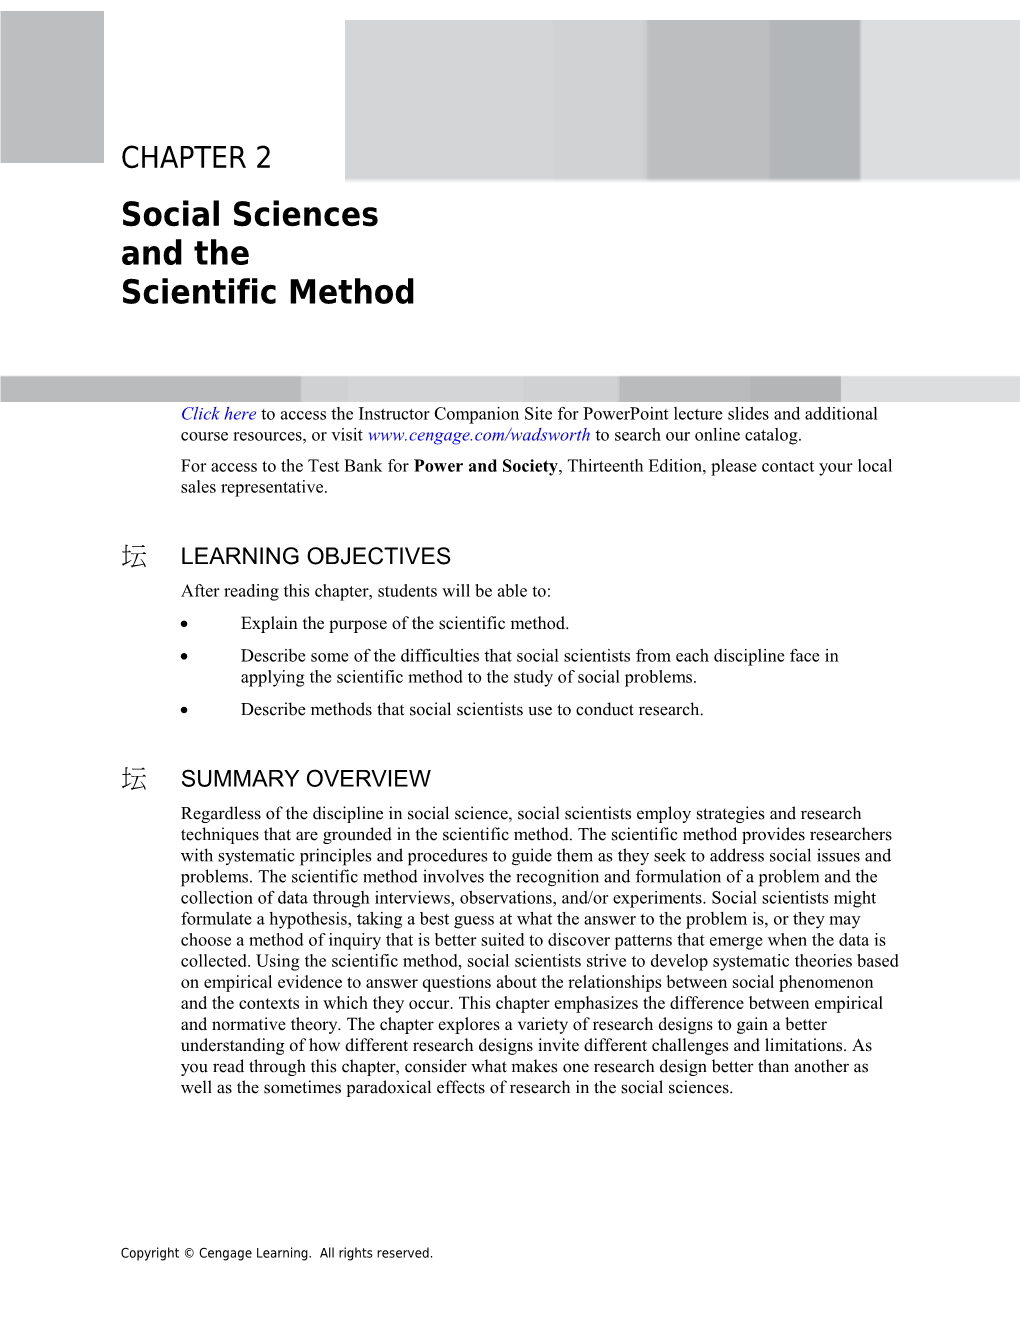 Chapter 2: Social Sciences and the Scientific Method1